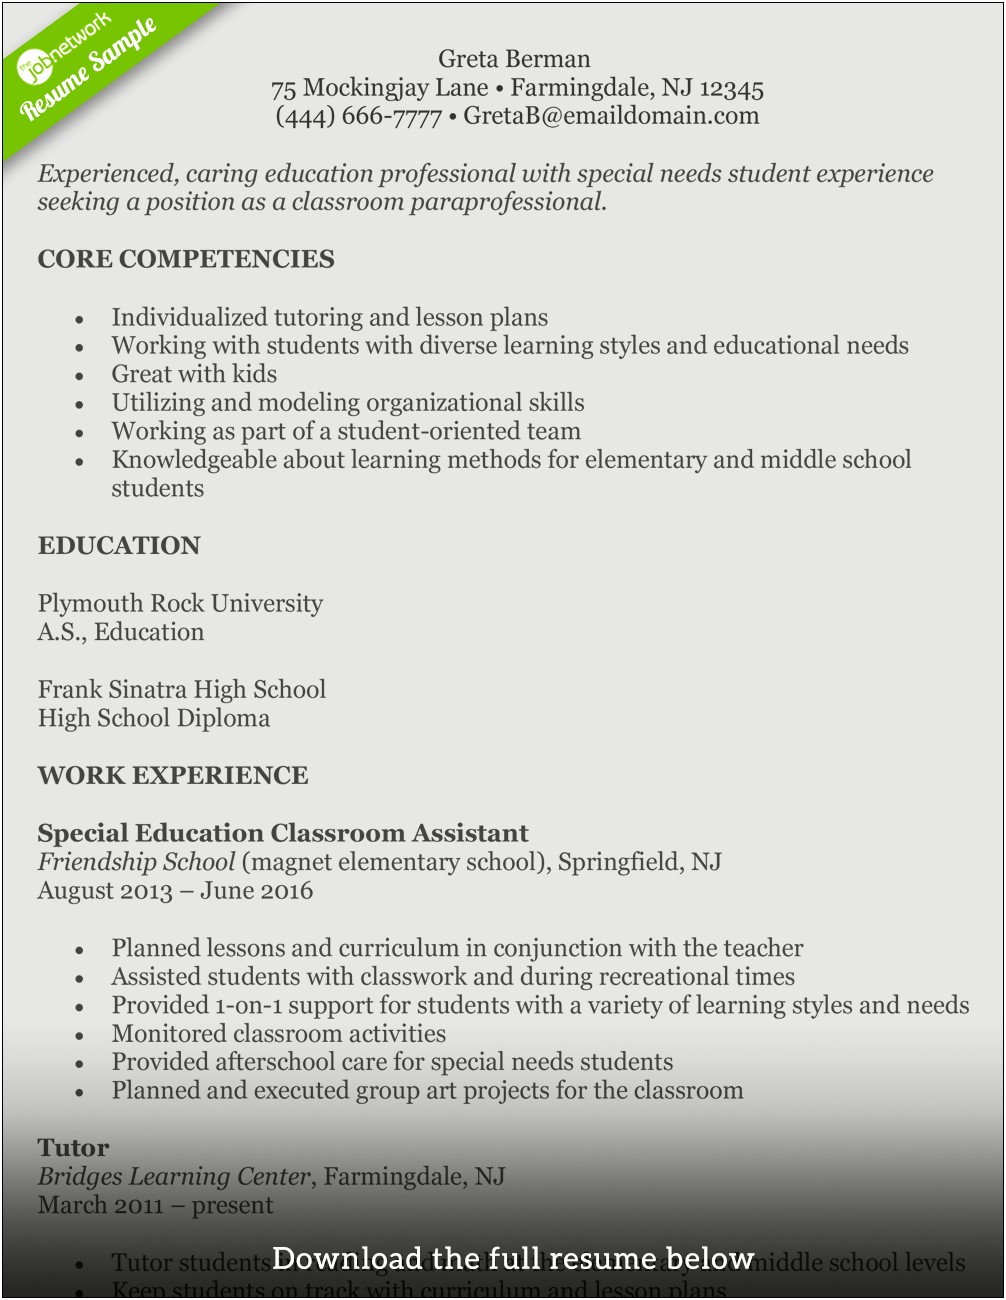 Resume For Principals Of Elementary School